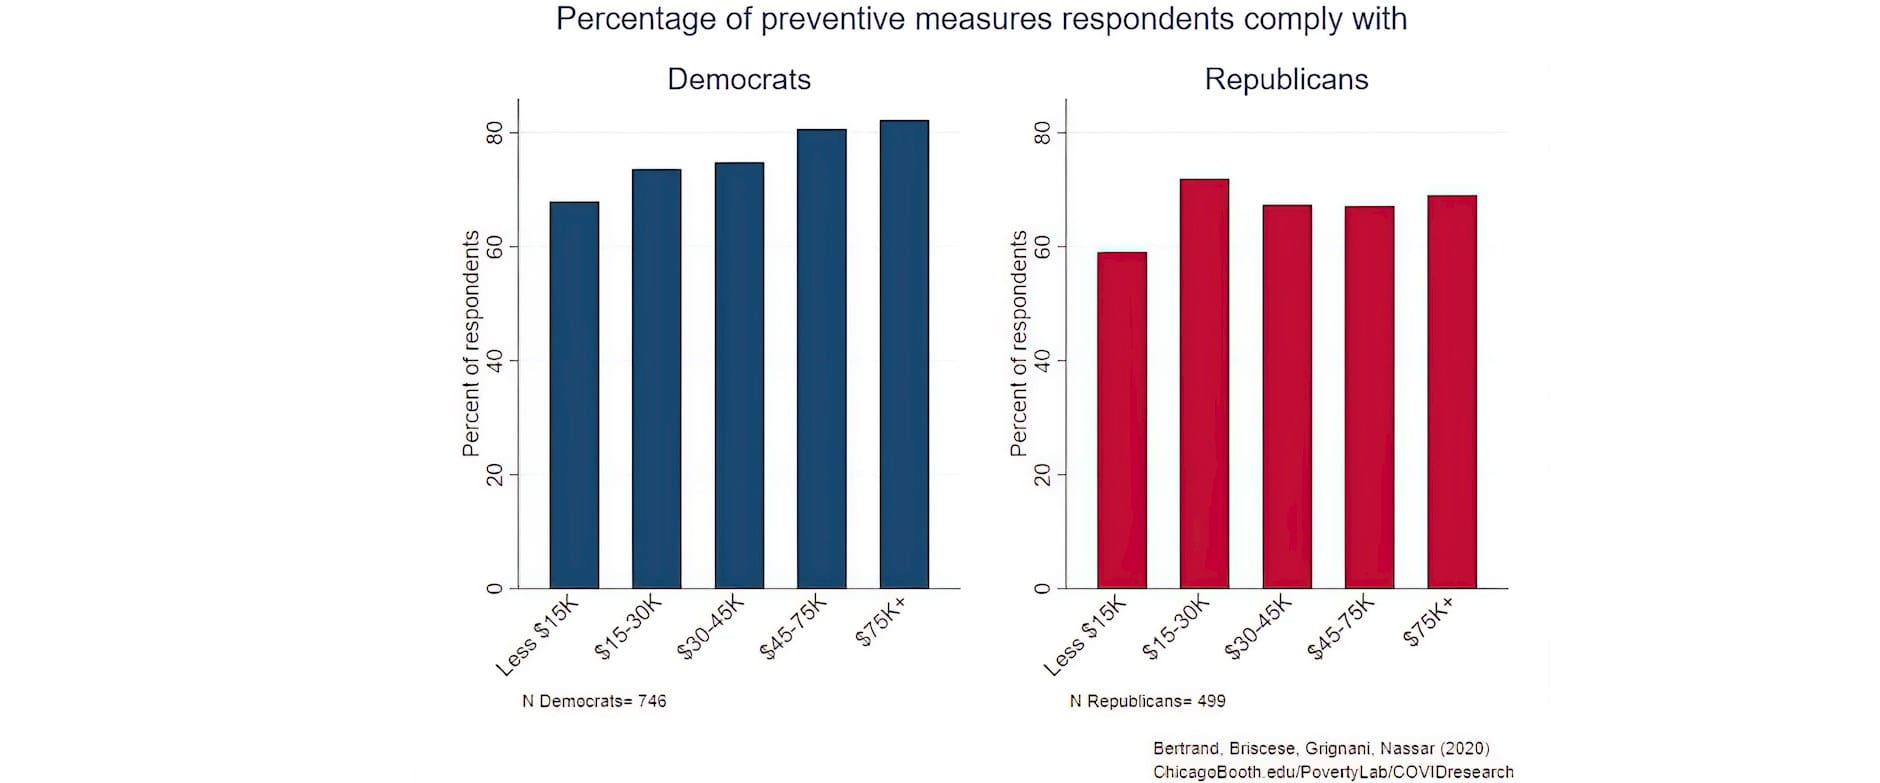 Finding 6 Figure Percentage of preventive measures respondents comply with